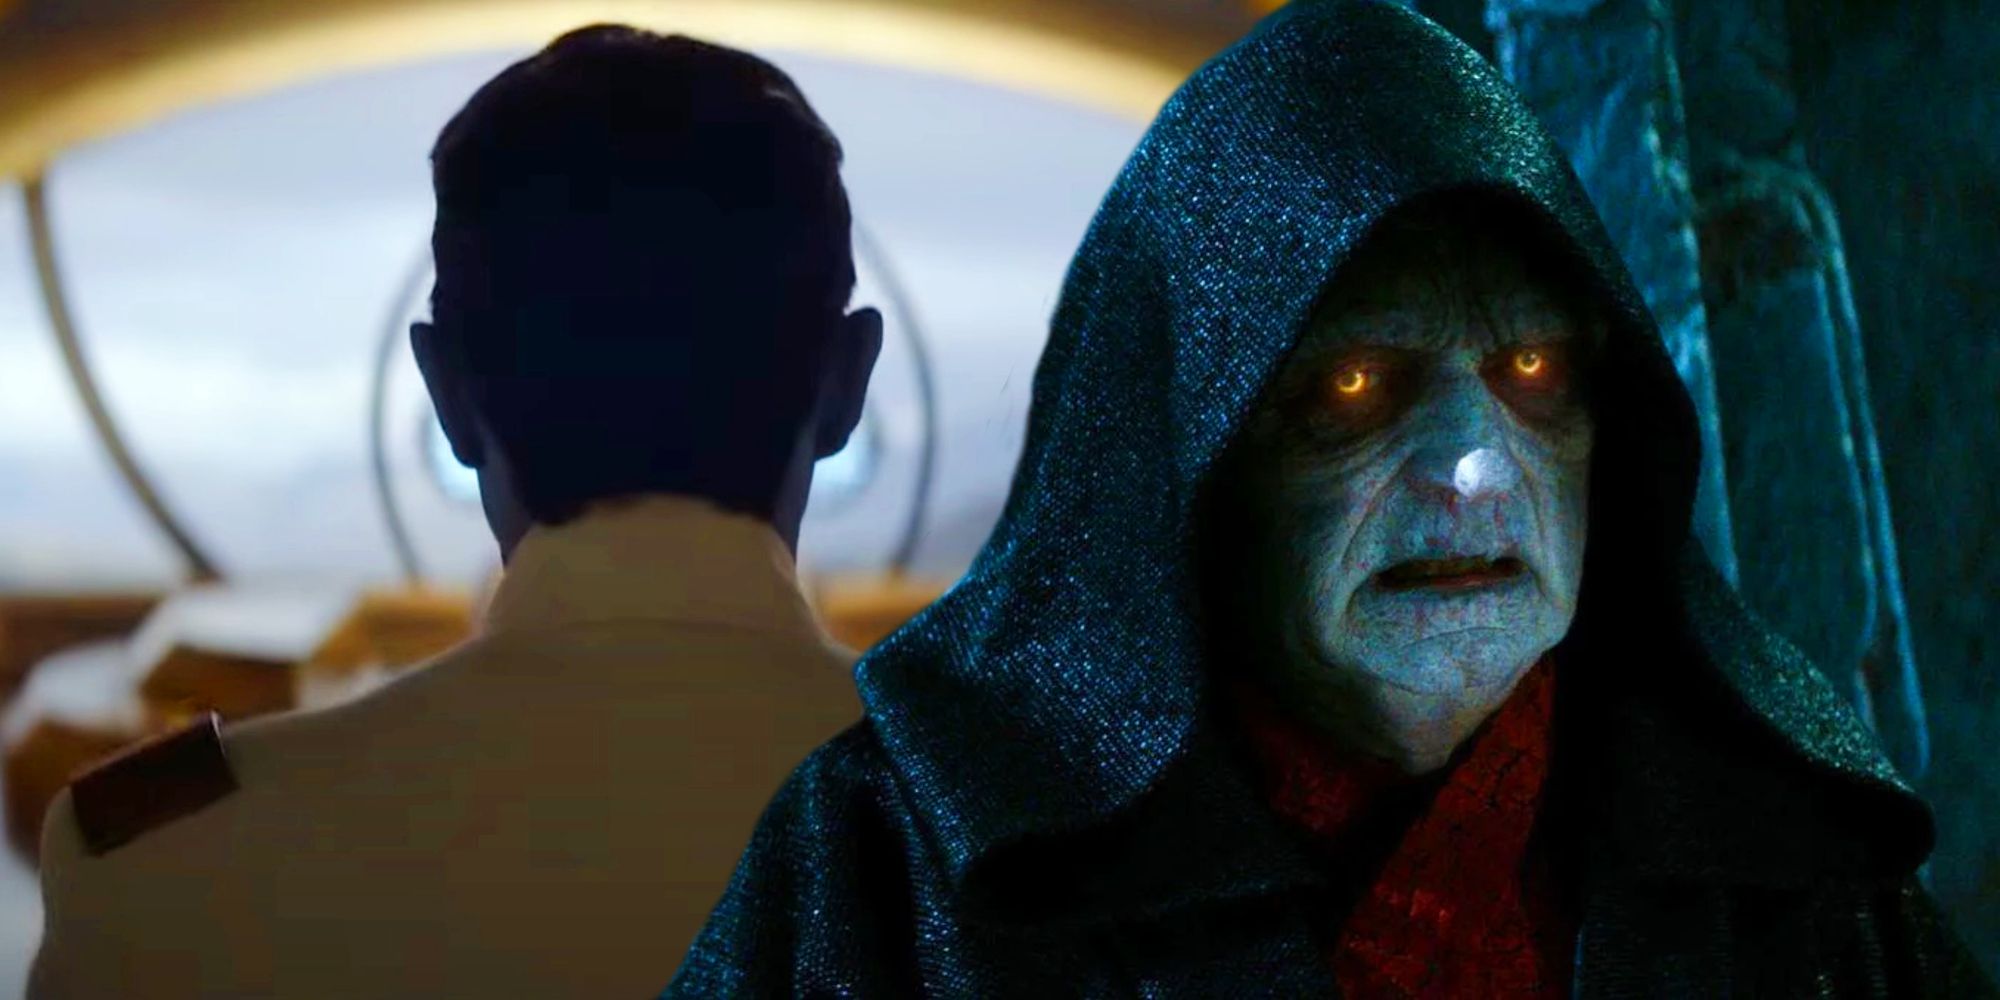 Grand Admiral Thrawn from Ahsoka and Emperor Palpatine in Star Wars: The Rise of Skywalker.